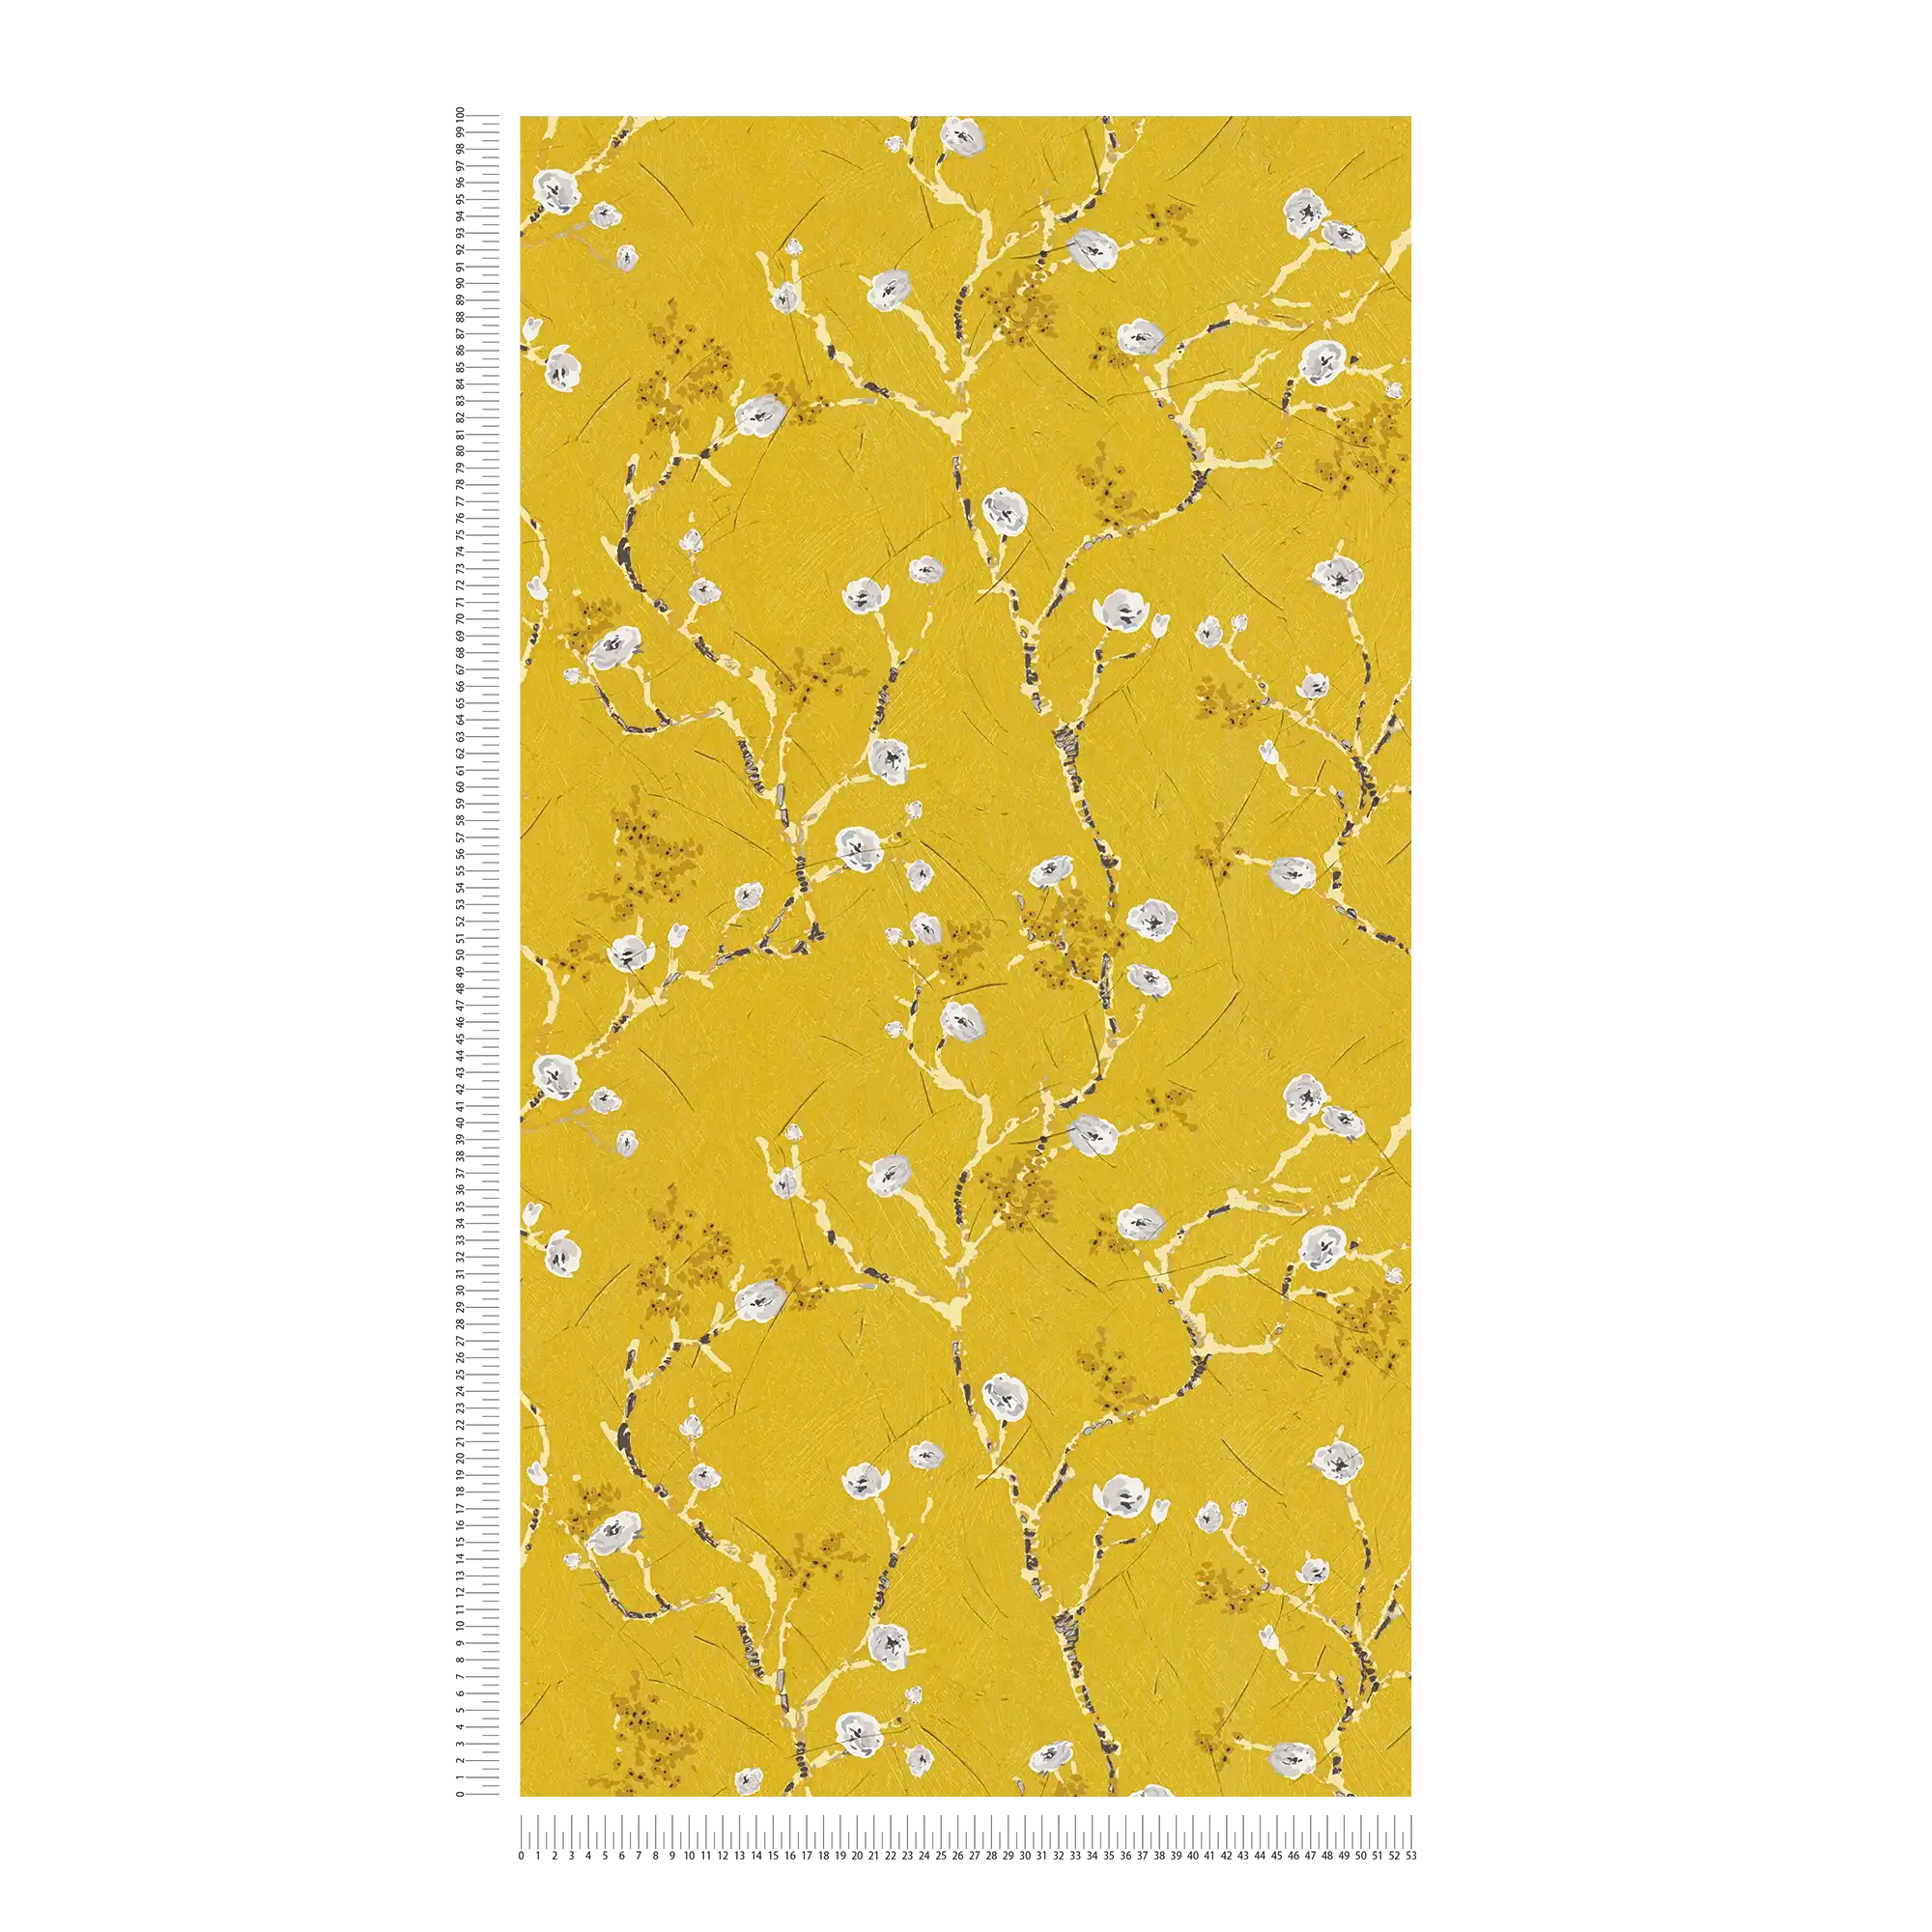             Yellow wallpaper with flowering branches in drawing style
        